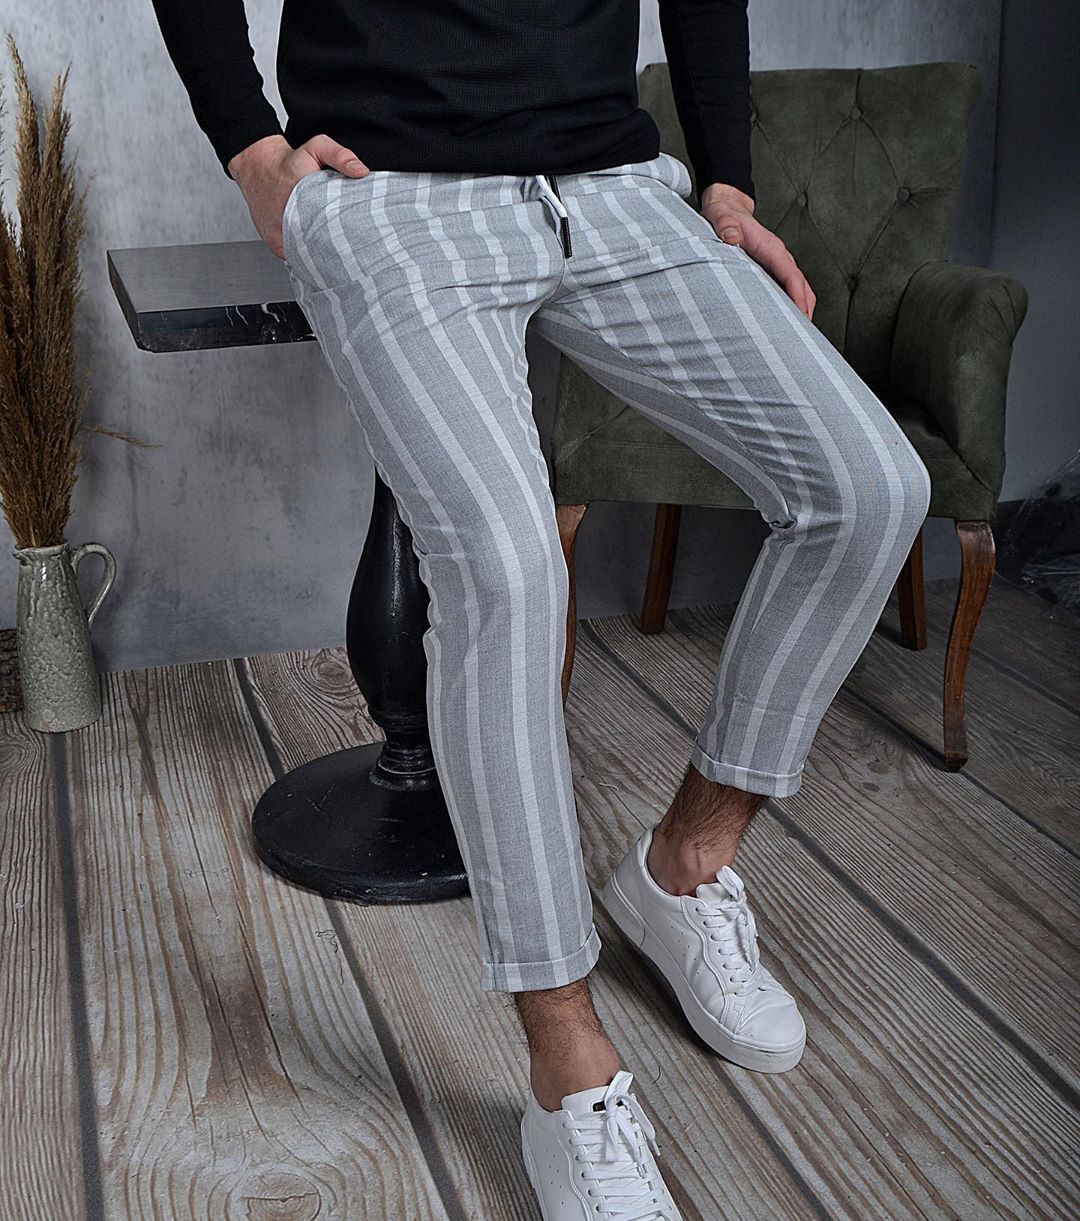 Double stripe casual chinos